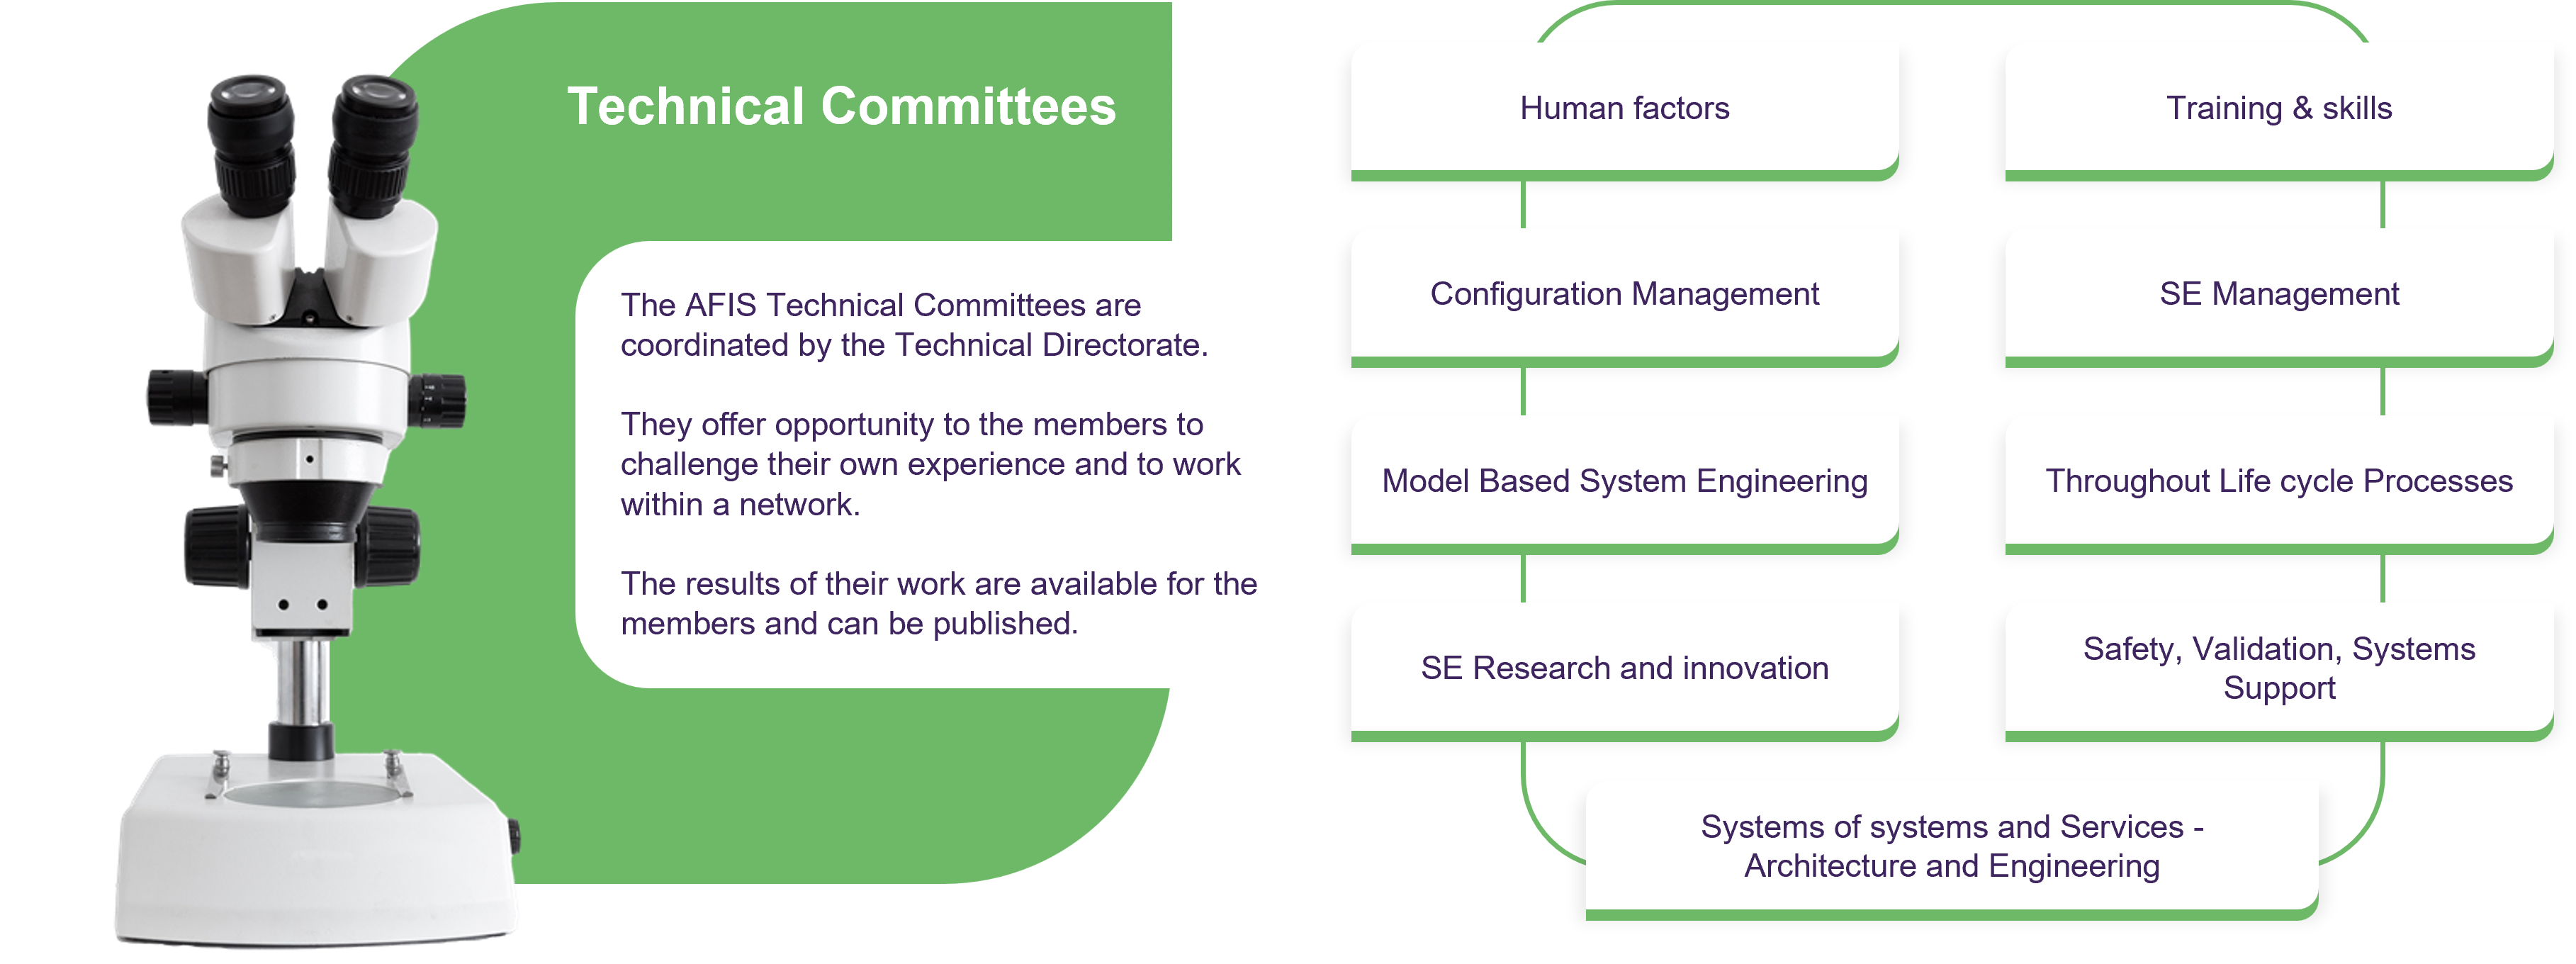 AFIS Technical Committees organization